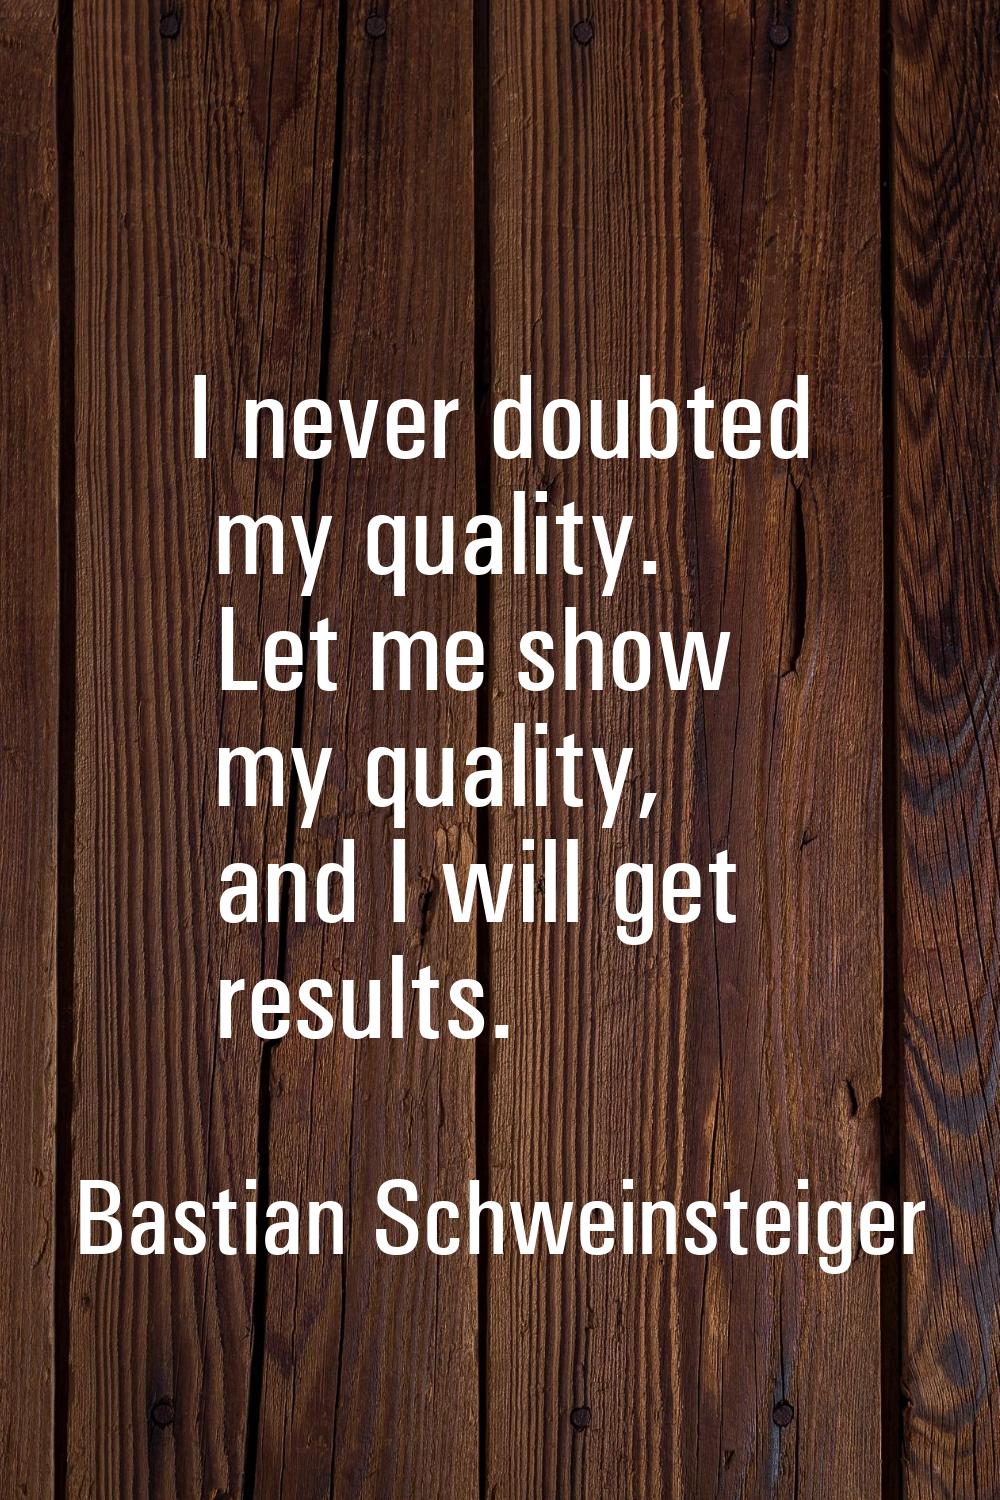 I never doubted my quality. Let me show my quality, and I will get results.